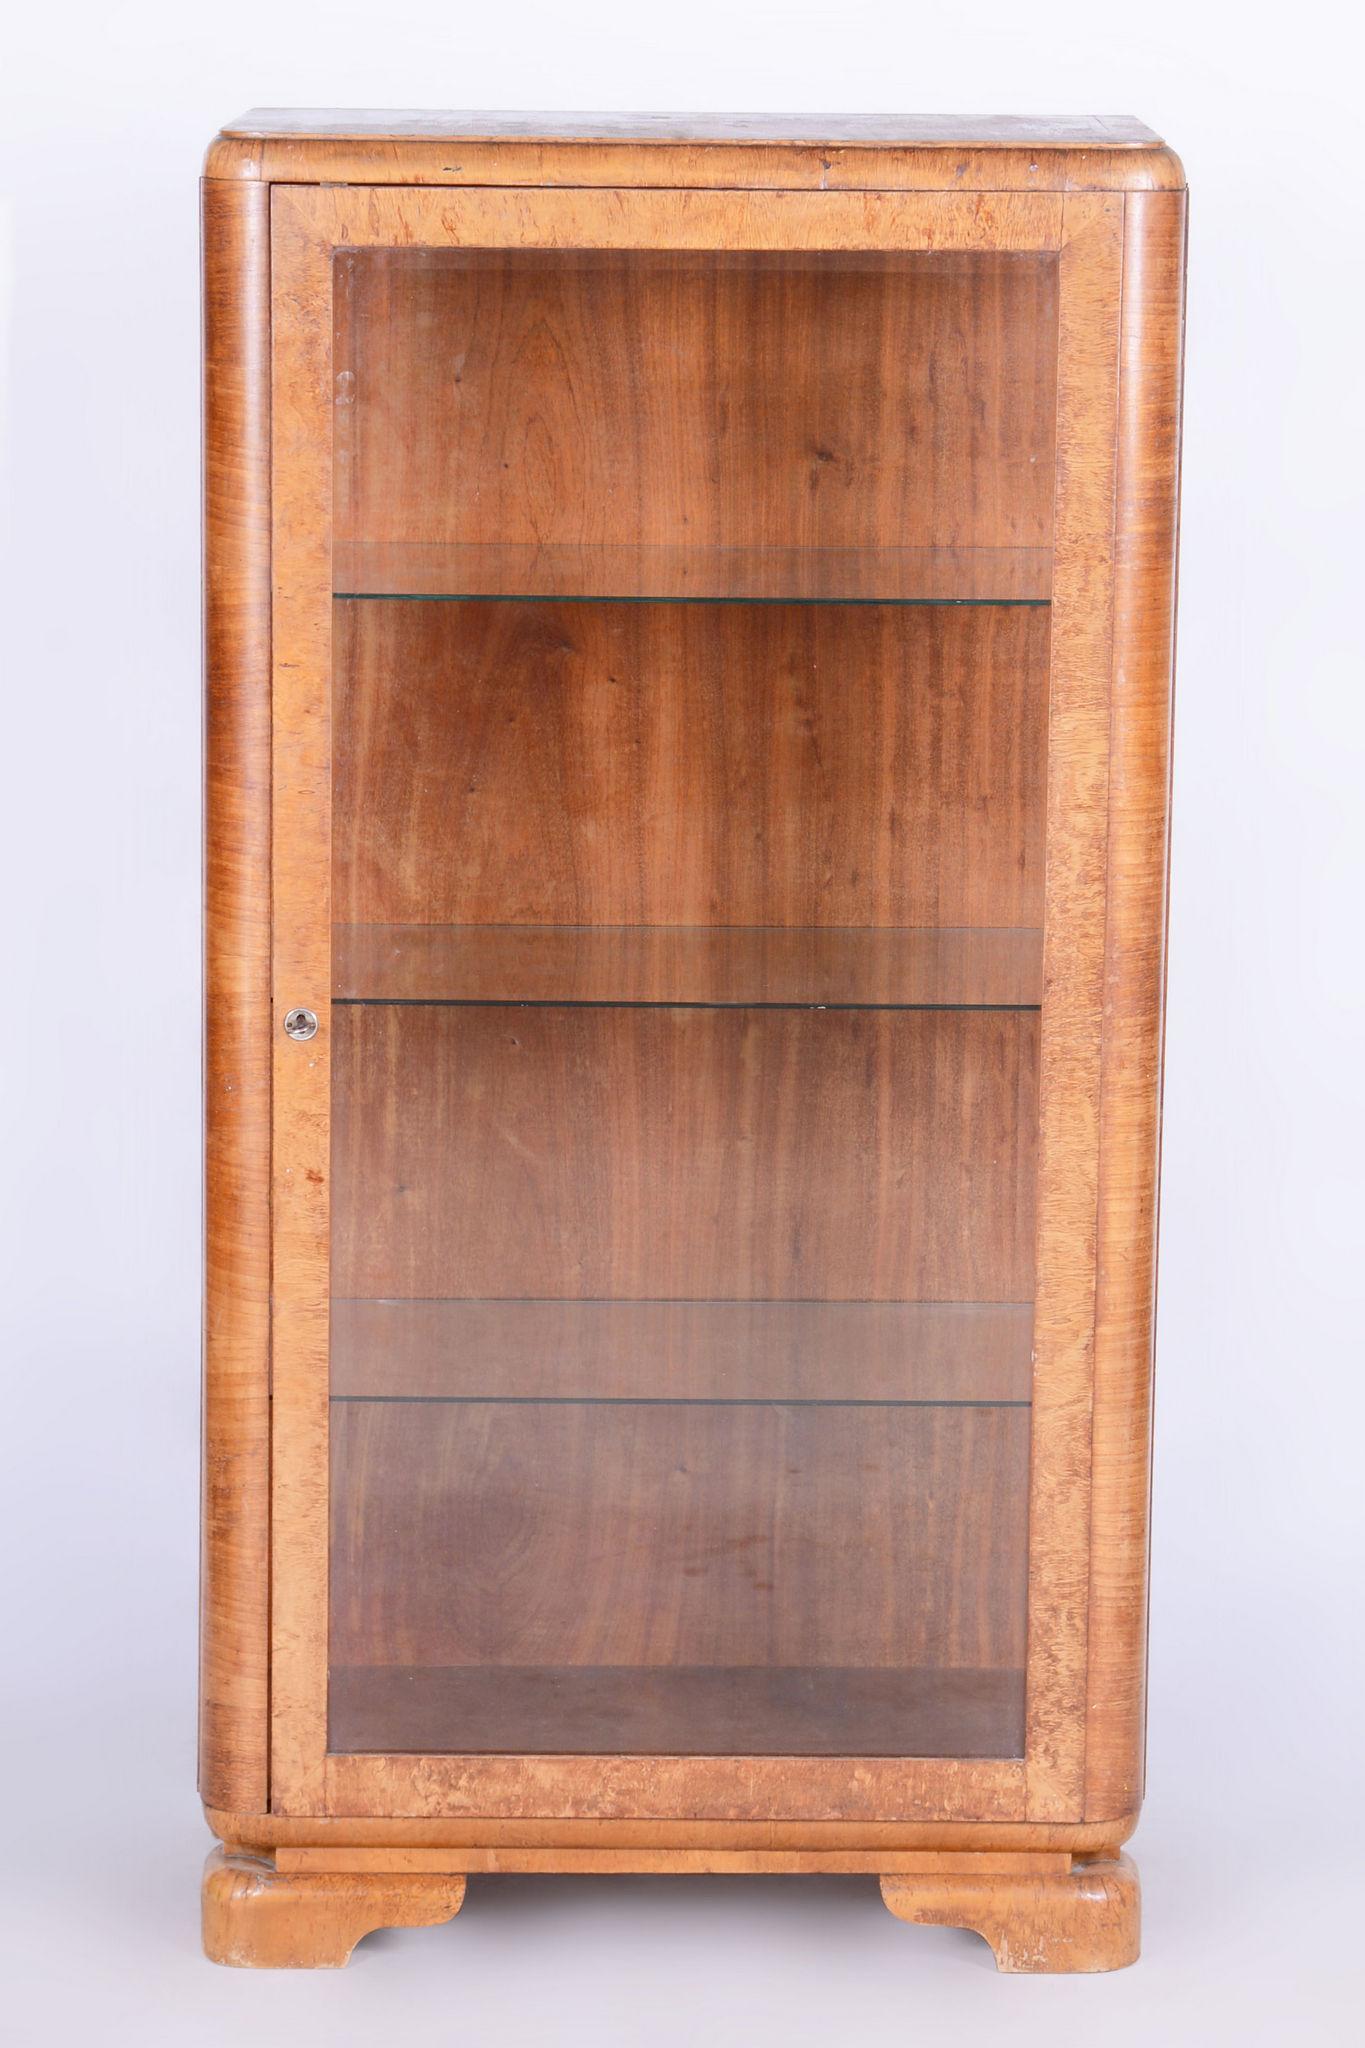 Restored ArtDeco Display Cabinet Designed by Jindrich Halabala

Designer: Jindrich Halabala
Maker: UP Zavody
Source: Czechia
Period: 1930-1939
Material: Walnut, Glass
Revived polish

According to the original process, our professional refurbishing